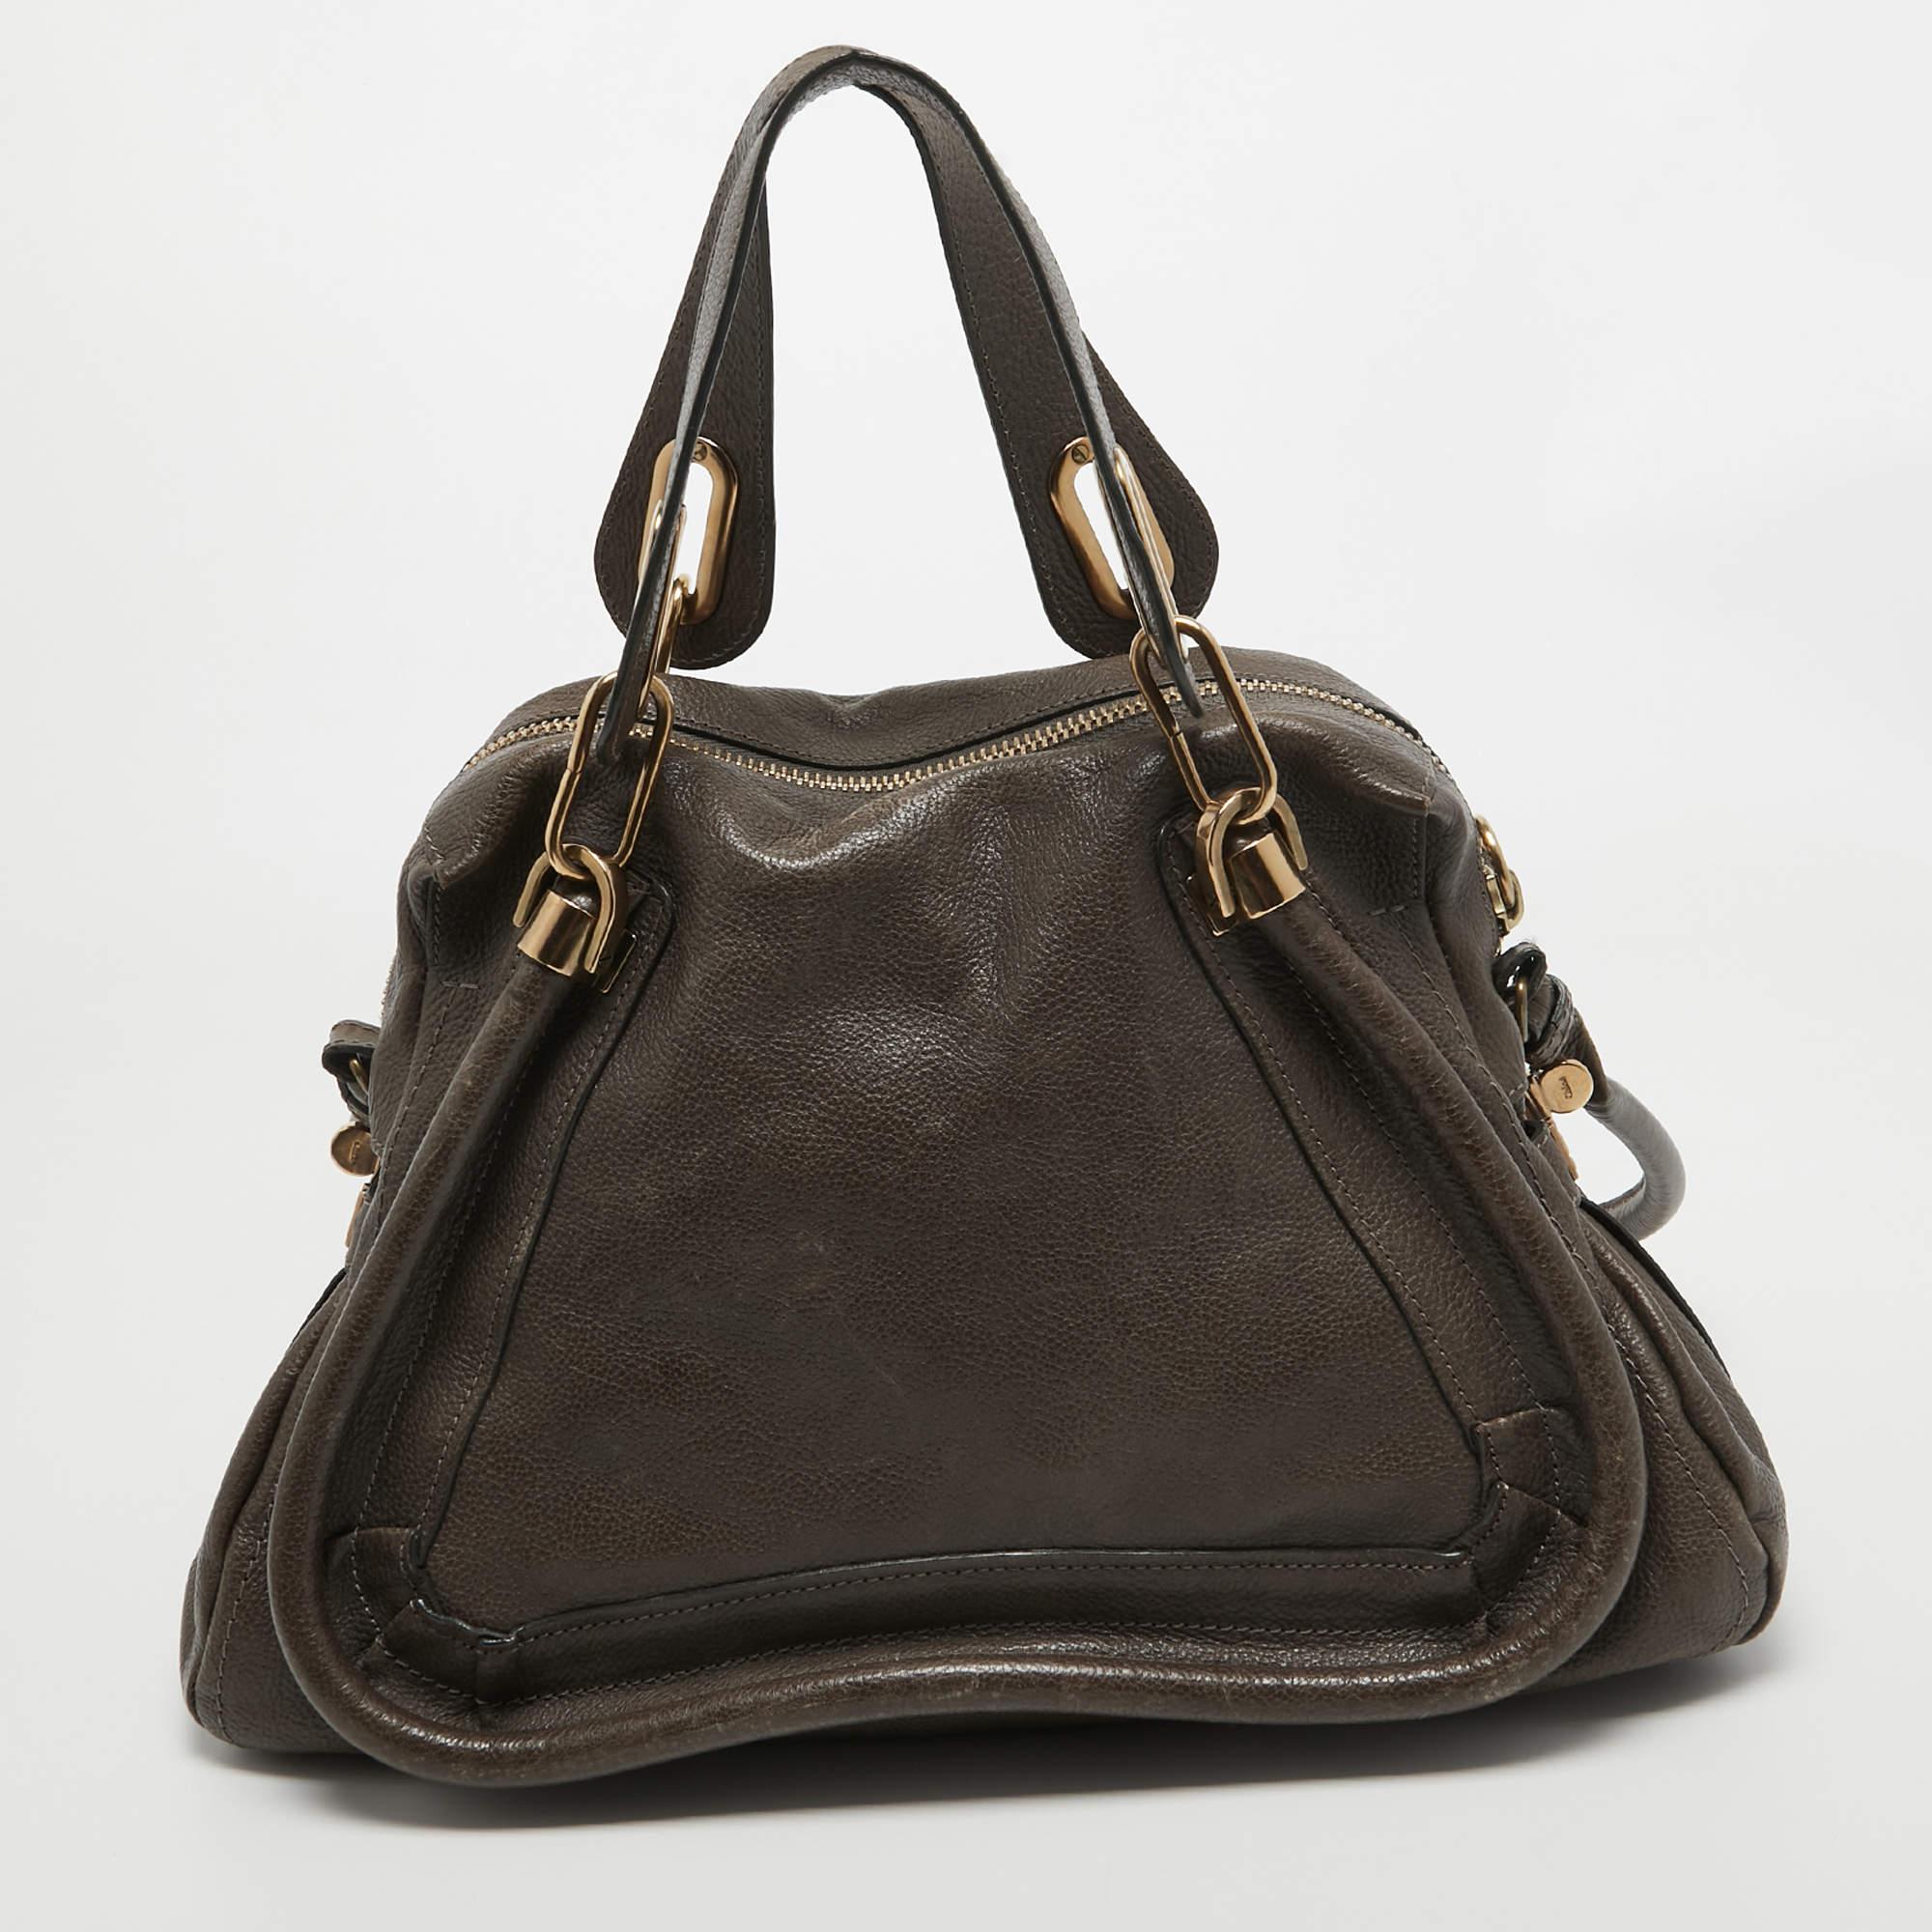 This Chloe Paraty satchel is rendered in the finest quality materials into an elegant design. Versatile and functional, it is well-sized for your daily use.

Includes: Detachable Strap